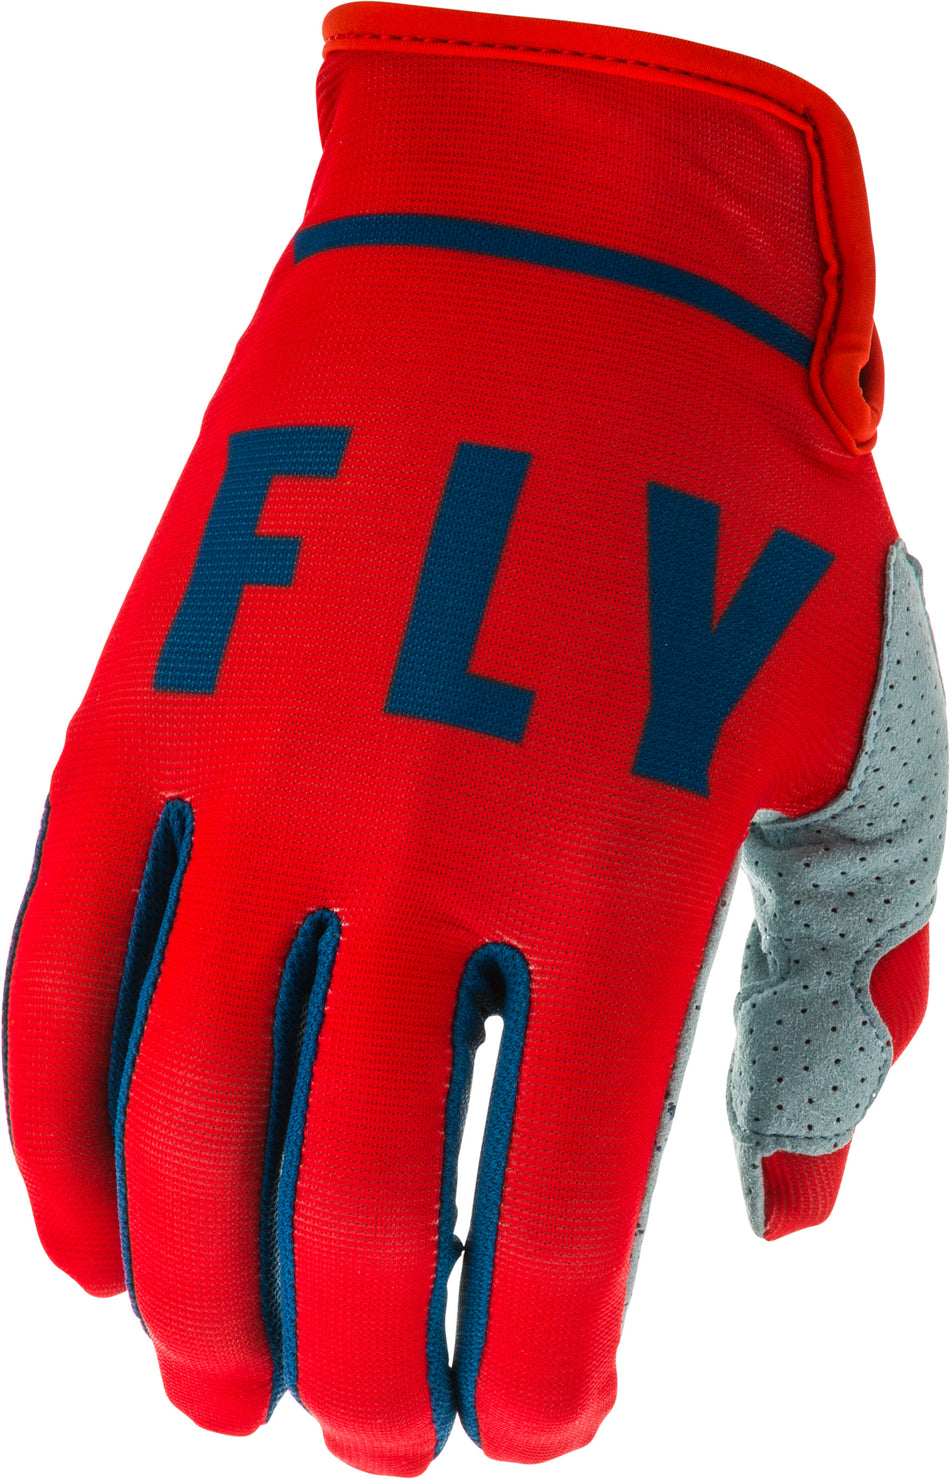 FLY RACING Lite Gloves Red/Slate/Navy Sz 04 373-71204